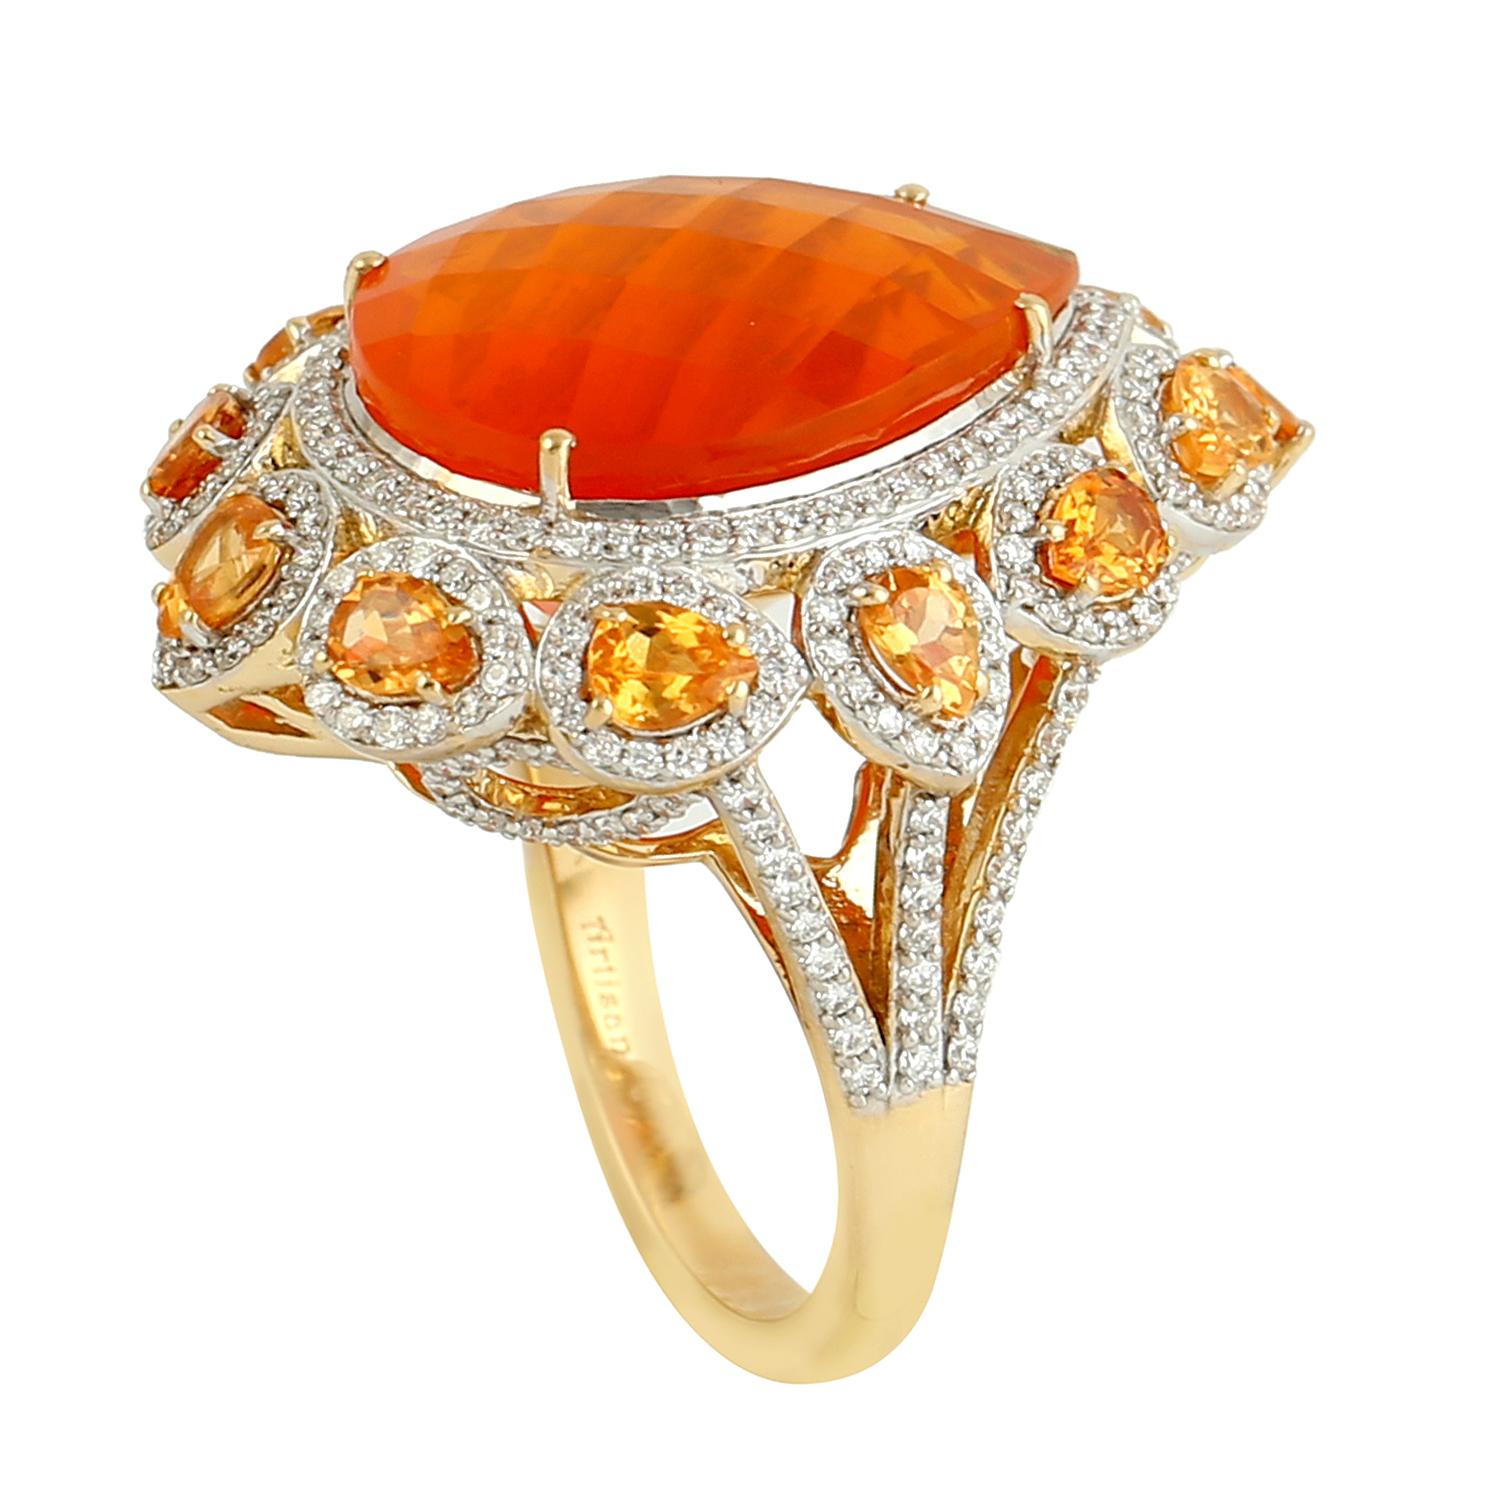 Mixed Cut Pear Shaped Fire Opal Cocktail Ring With Garnet & Diamonds In 18k Yellow Gold For Sale